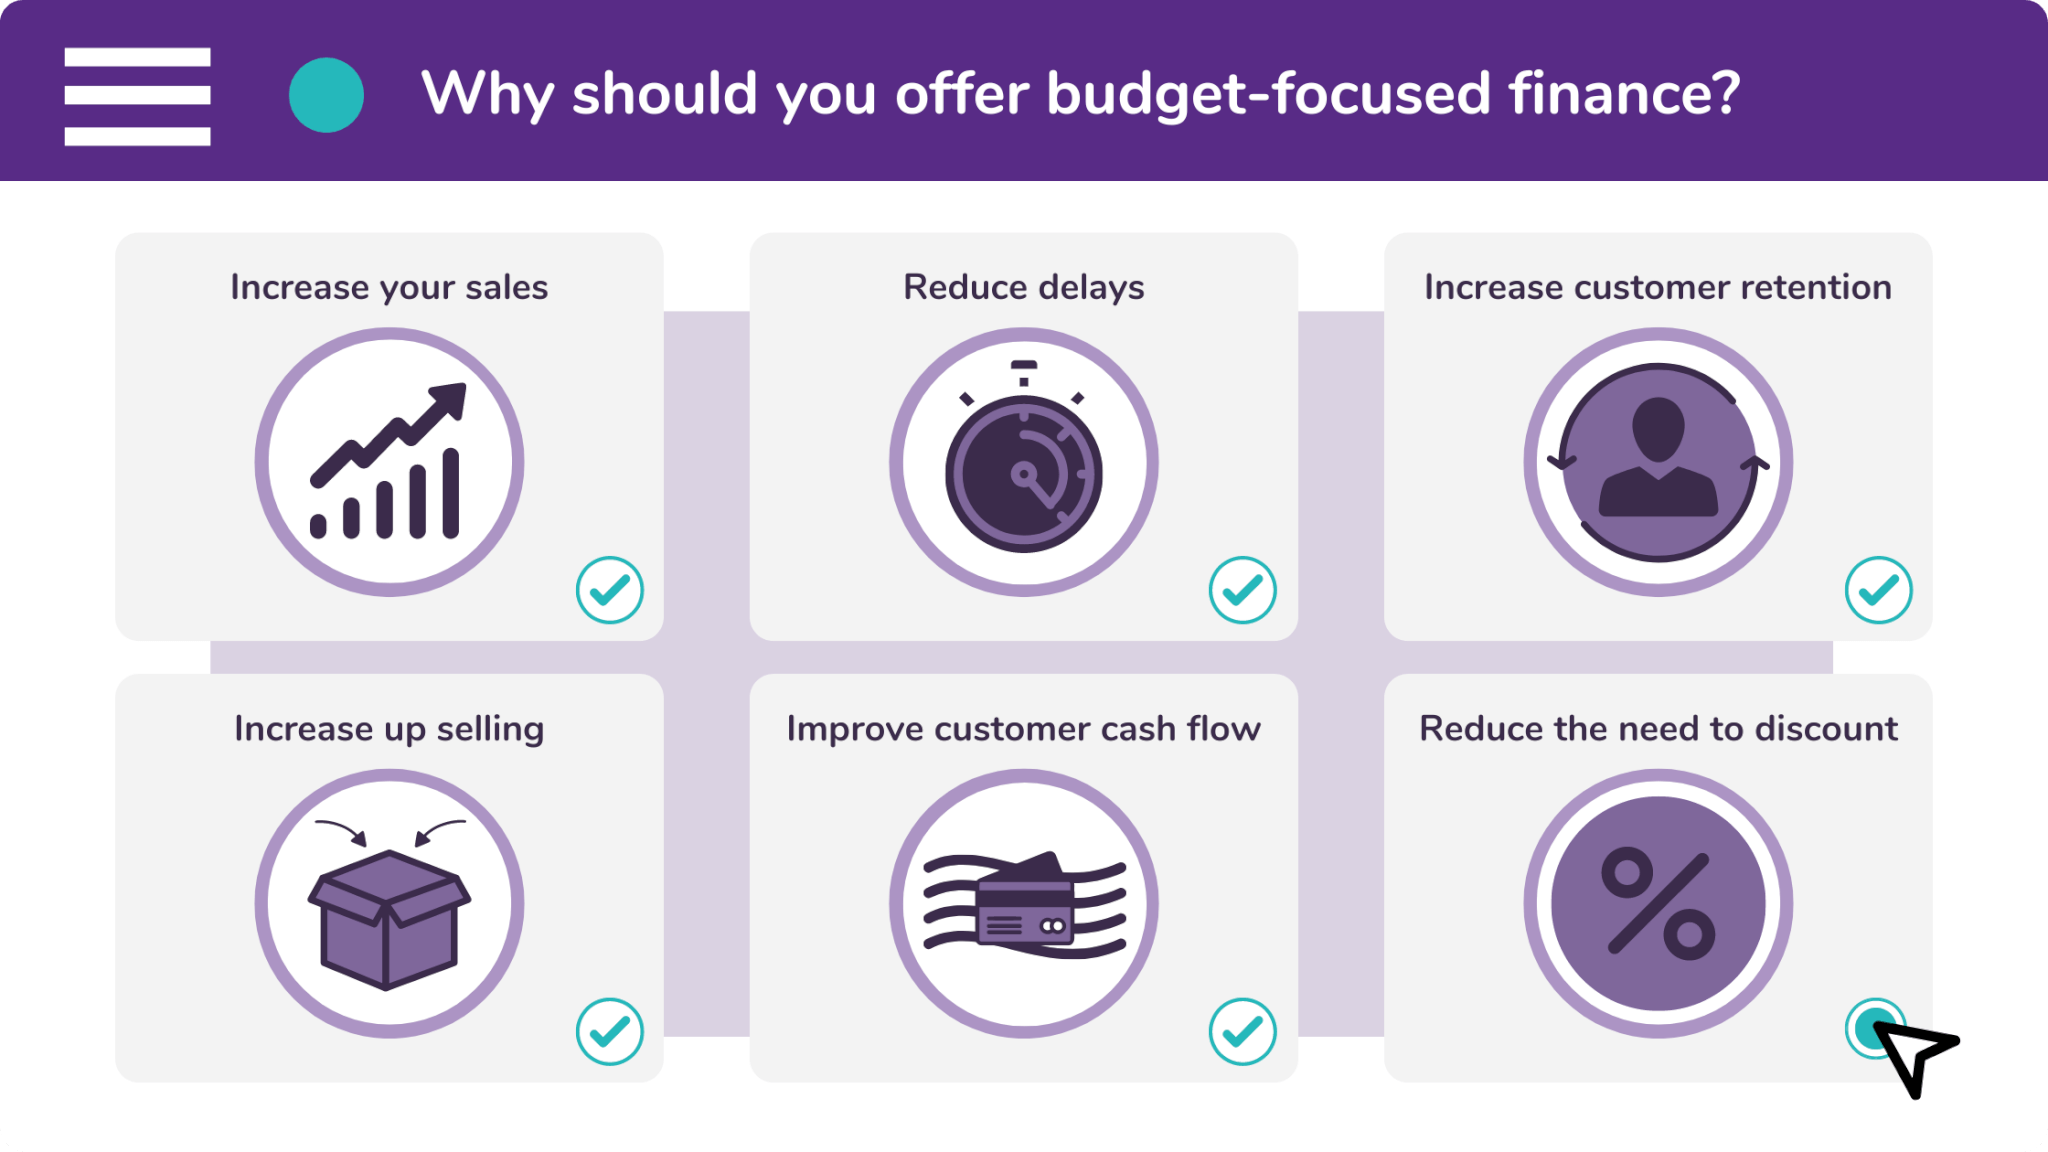 There are six reasons why businesses should offer budget-focused finance.